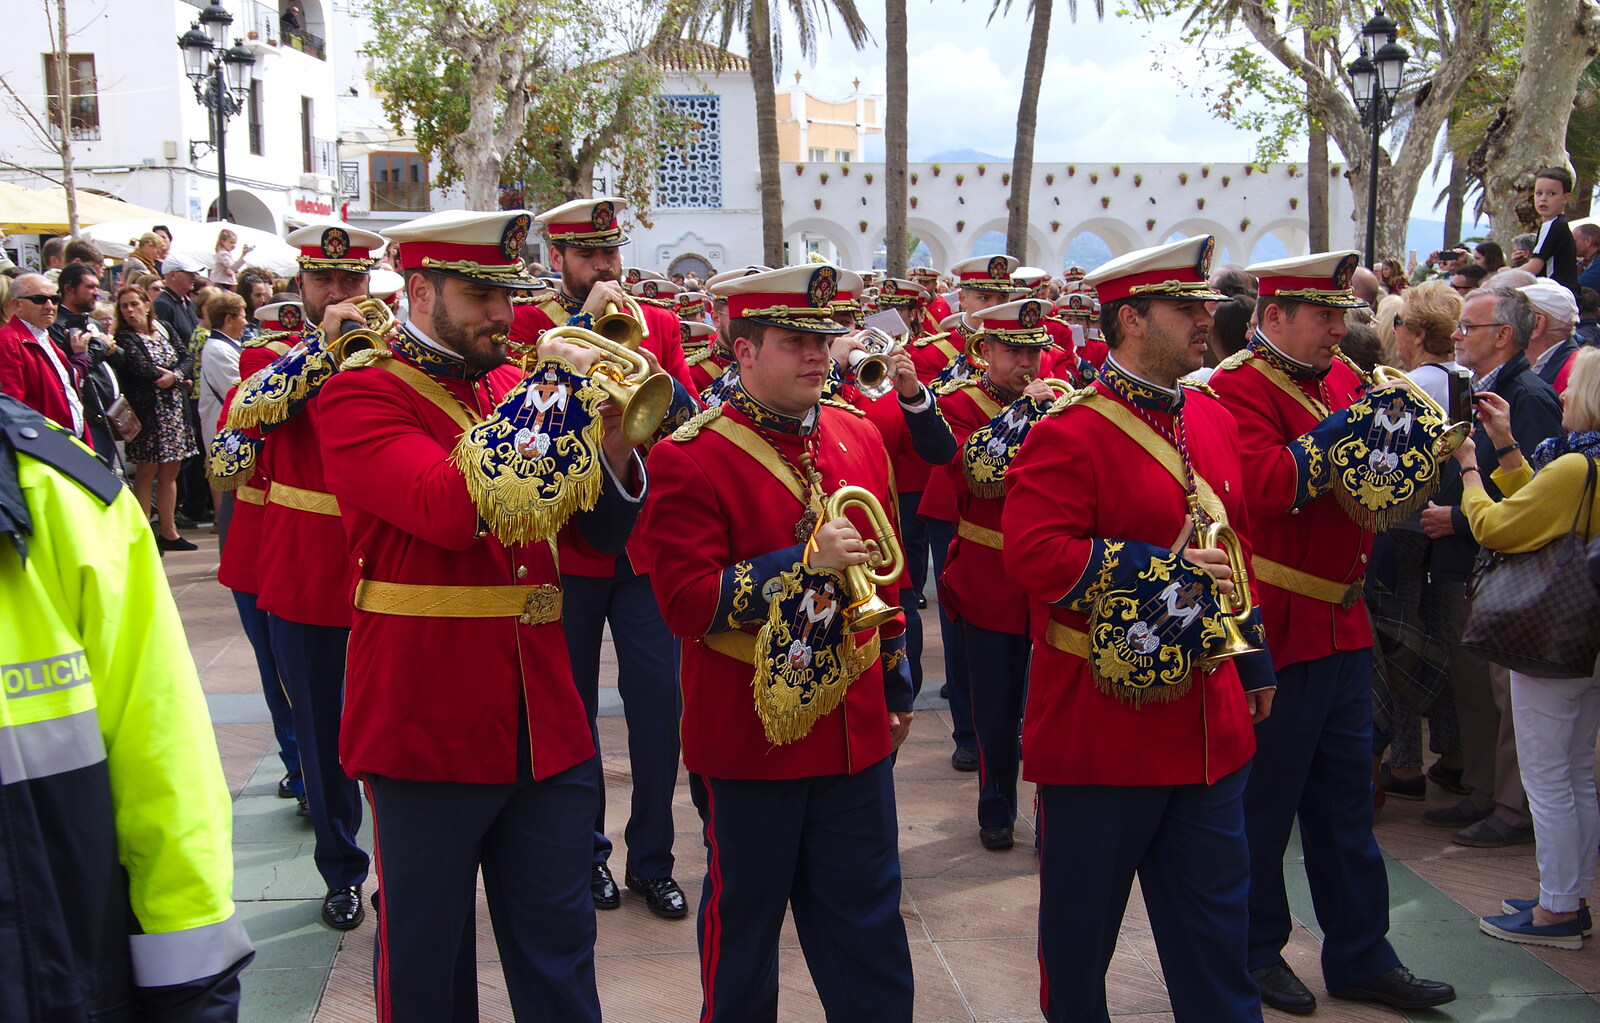 The bugle section marches past from An Easter Parade, Nerja, Andalusia, Spain - 21st April 2019